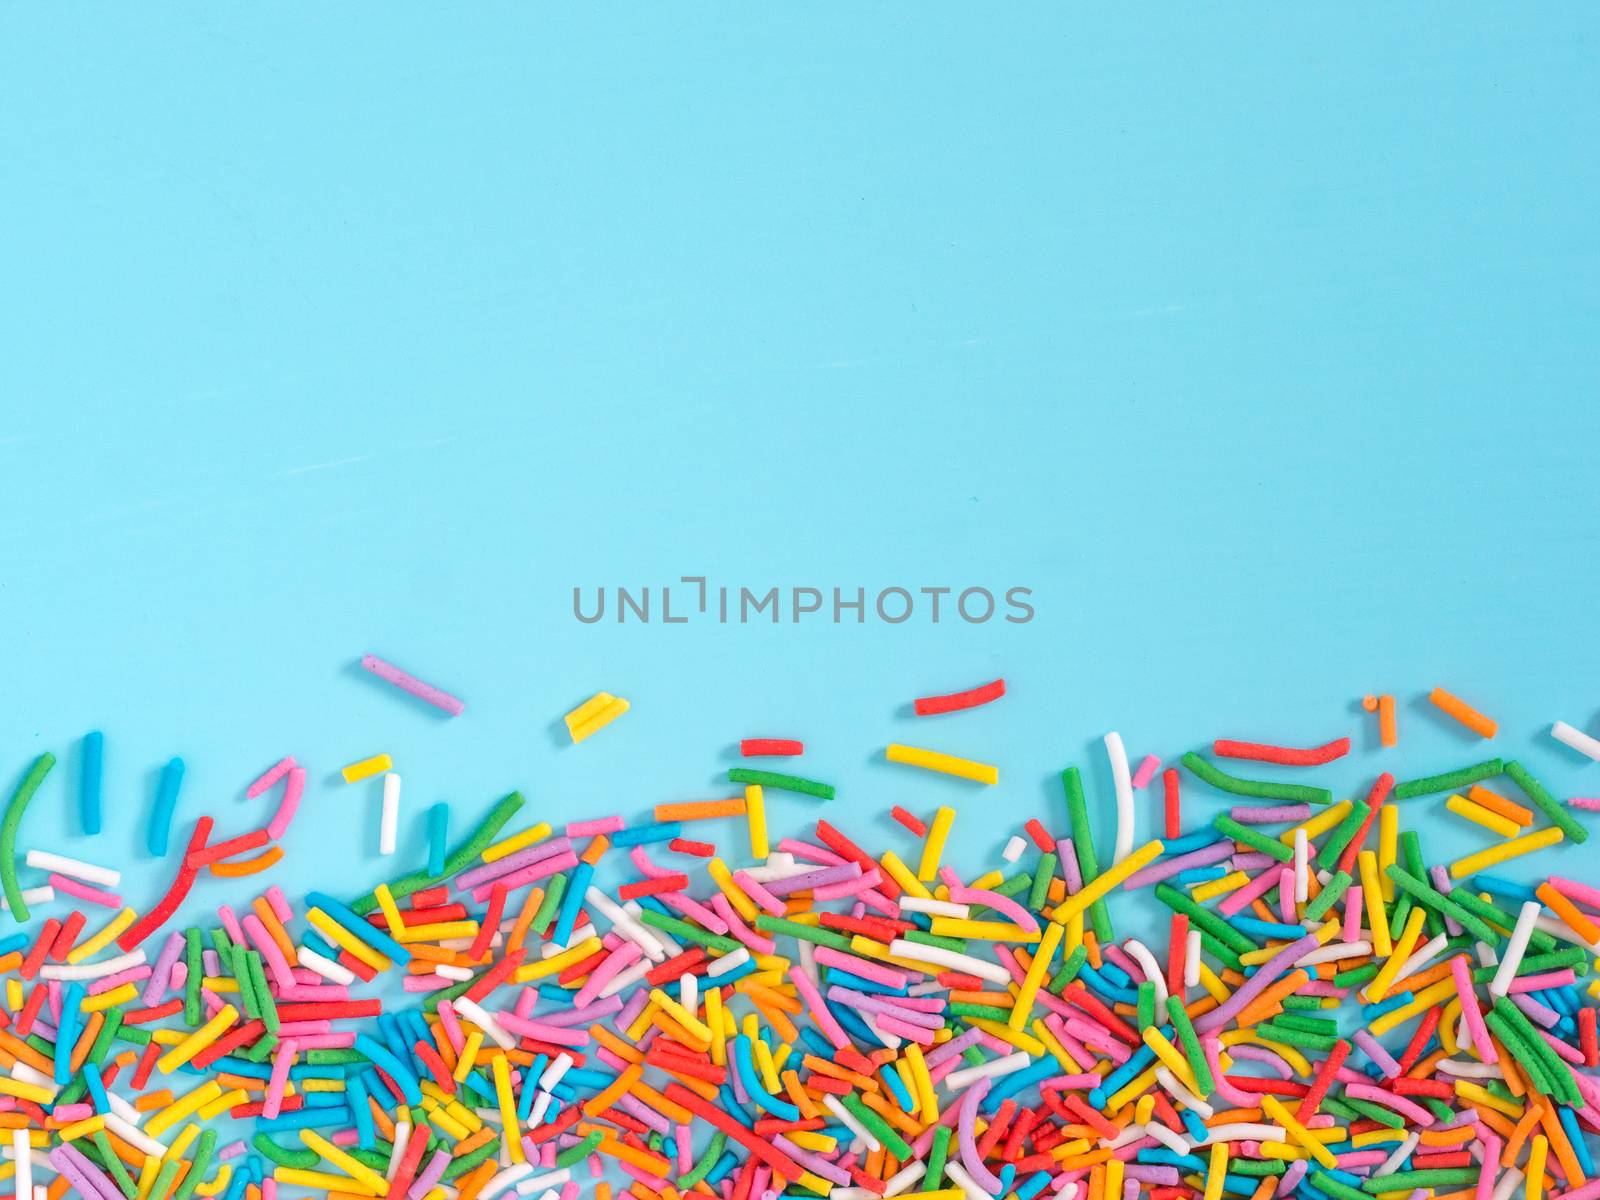 Border frame of colorful sprinkles on blue background with copyspace. Top view or flat lay